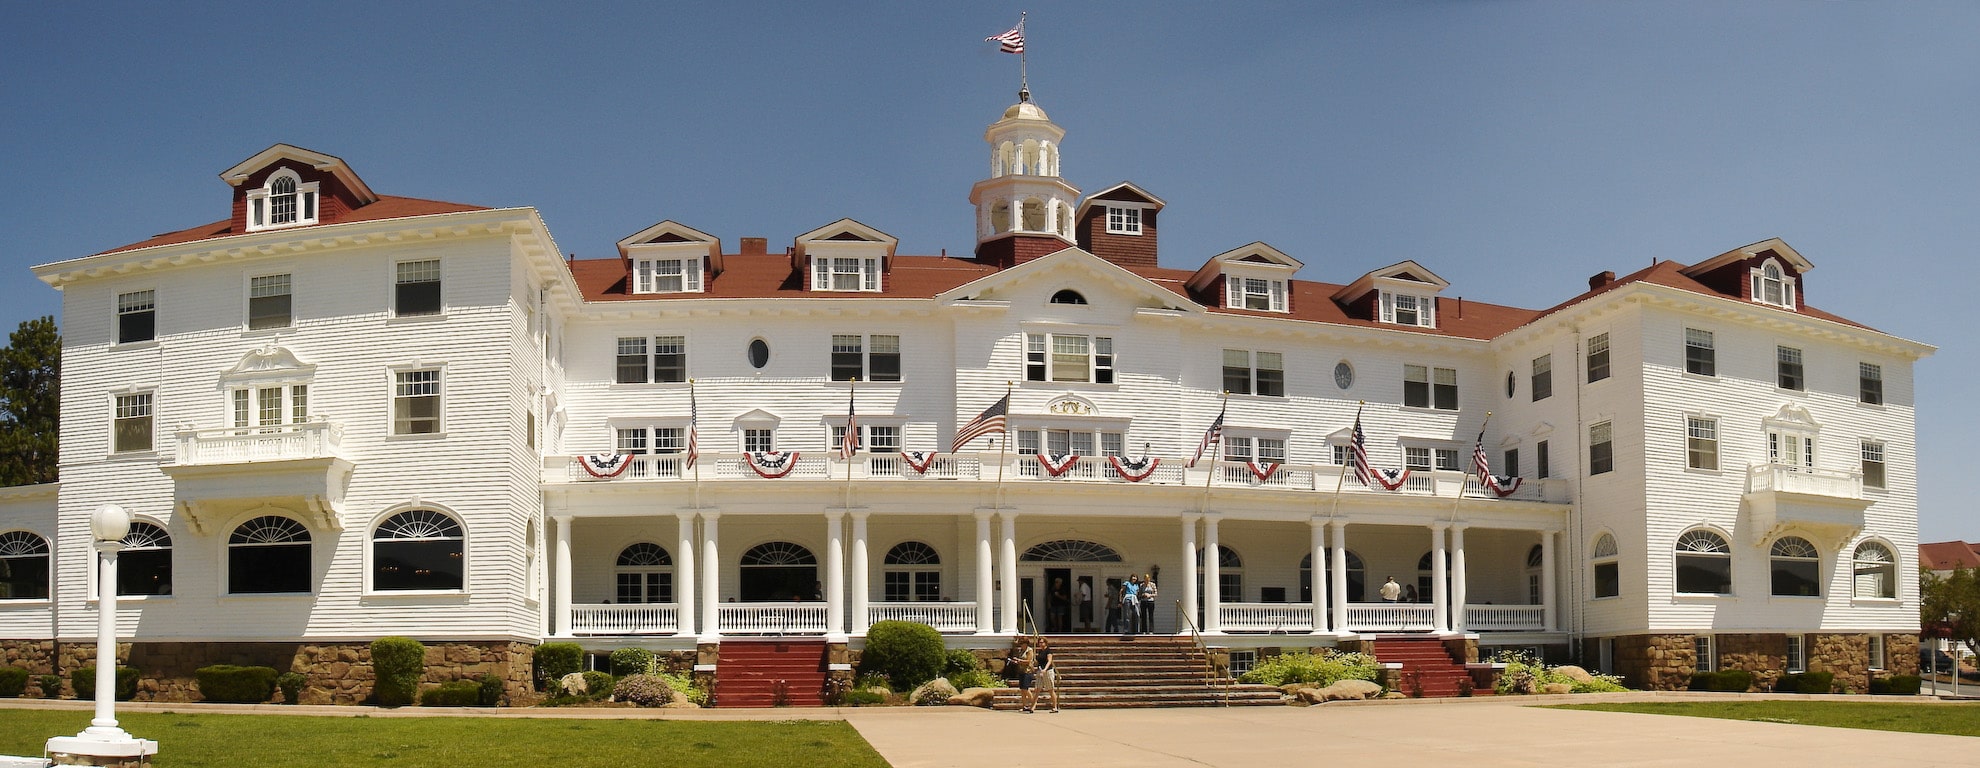 The Stanley Hotel 